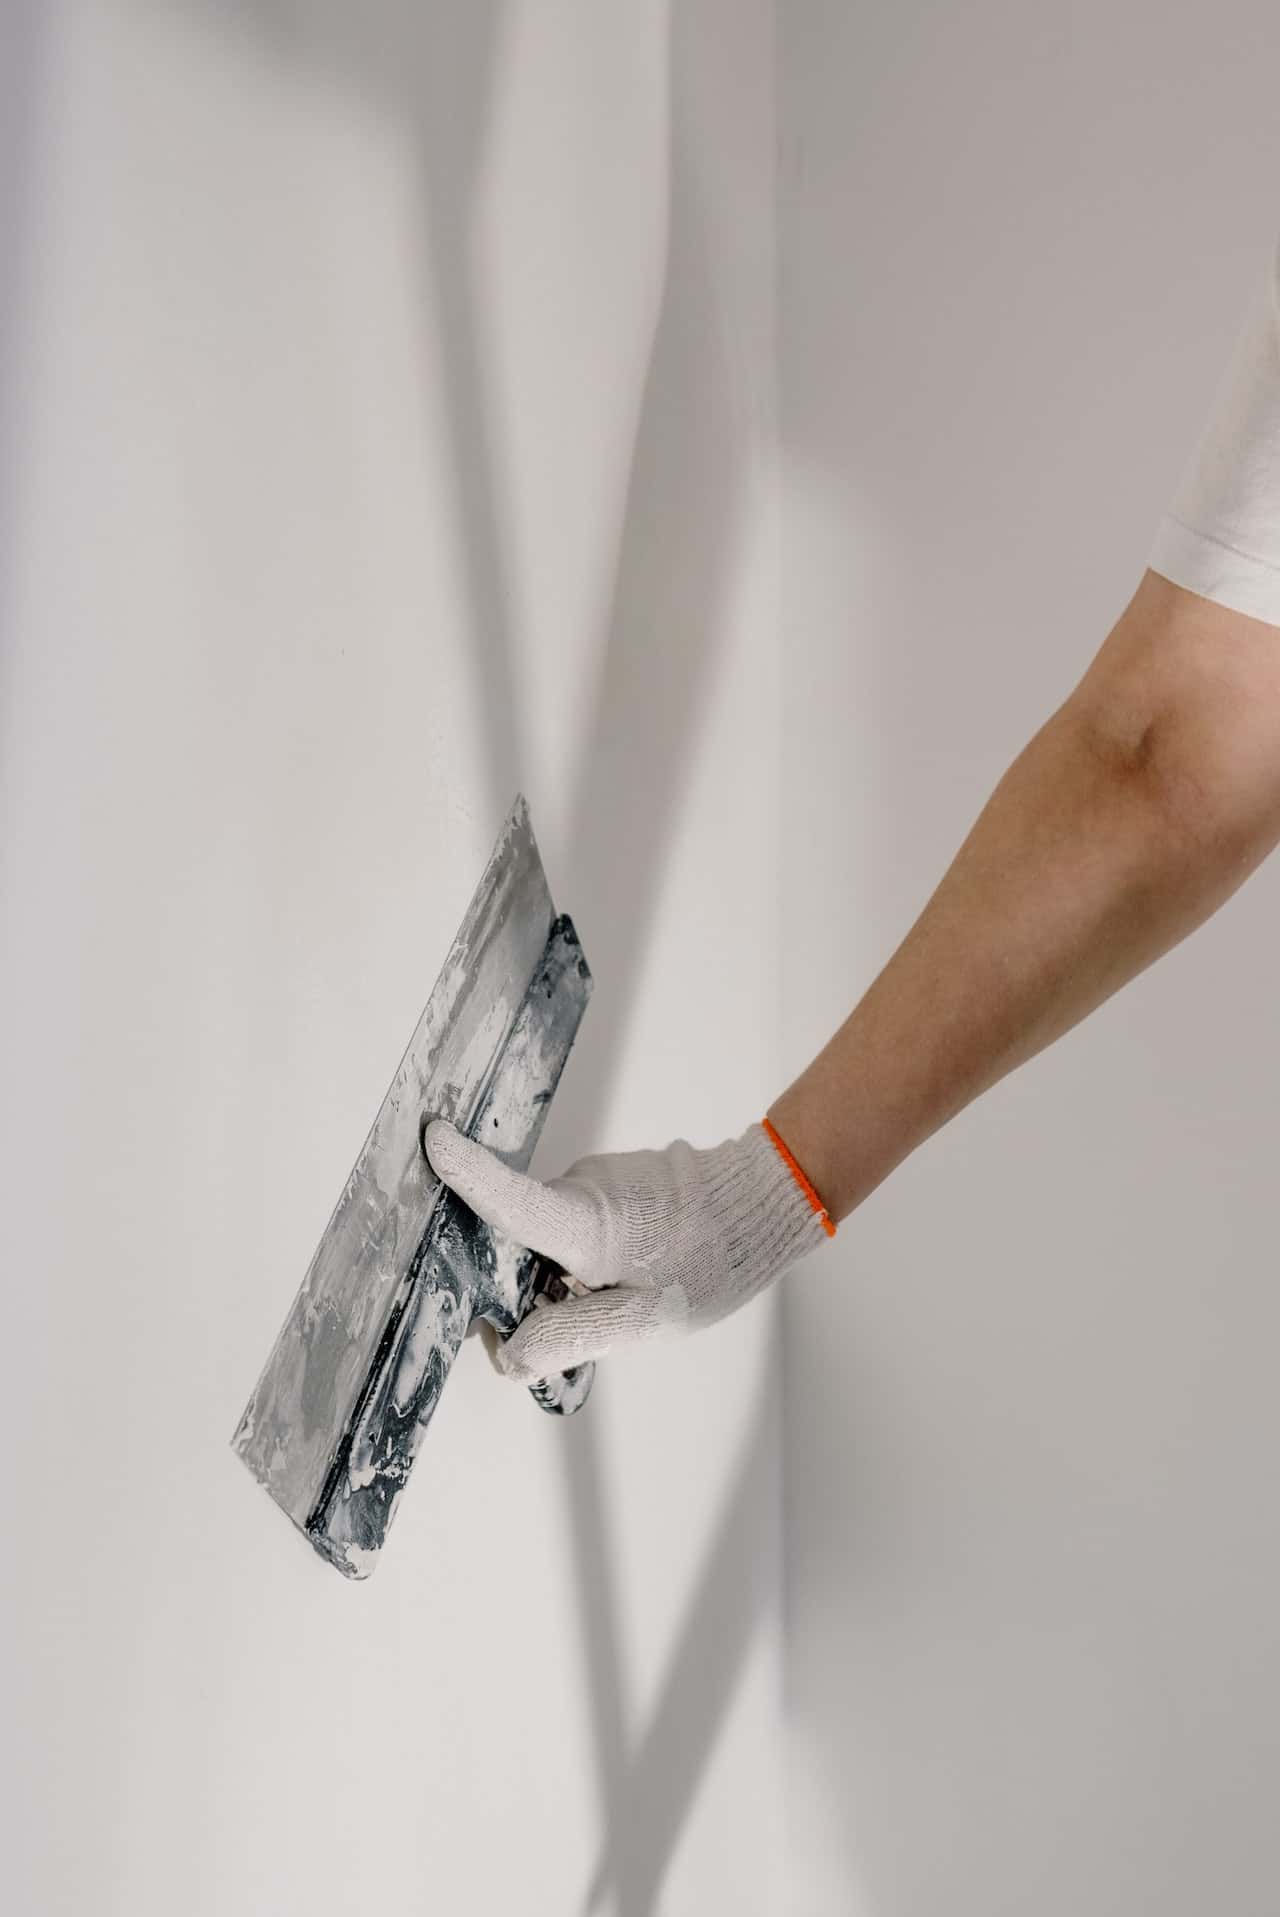 Wall putty design at home: Usage and applications